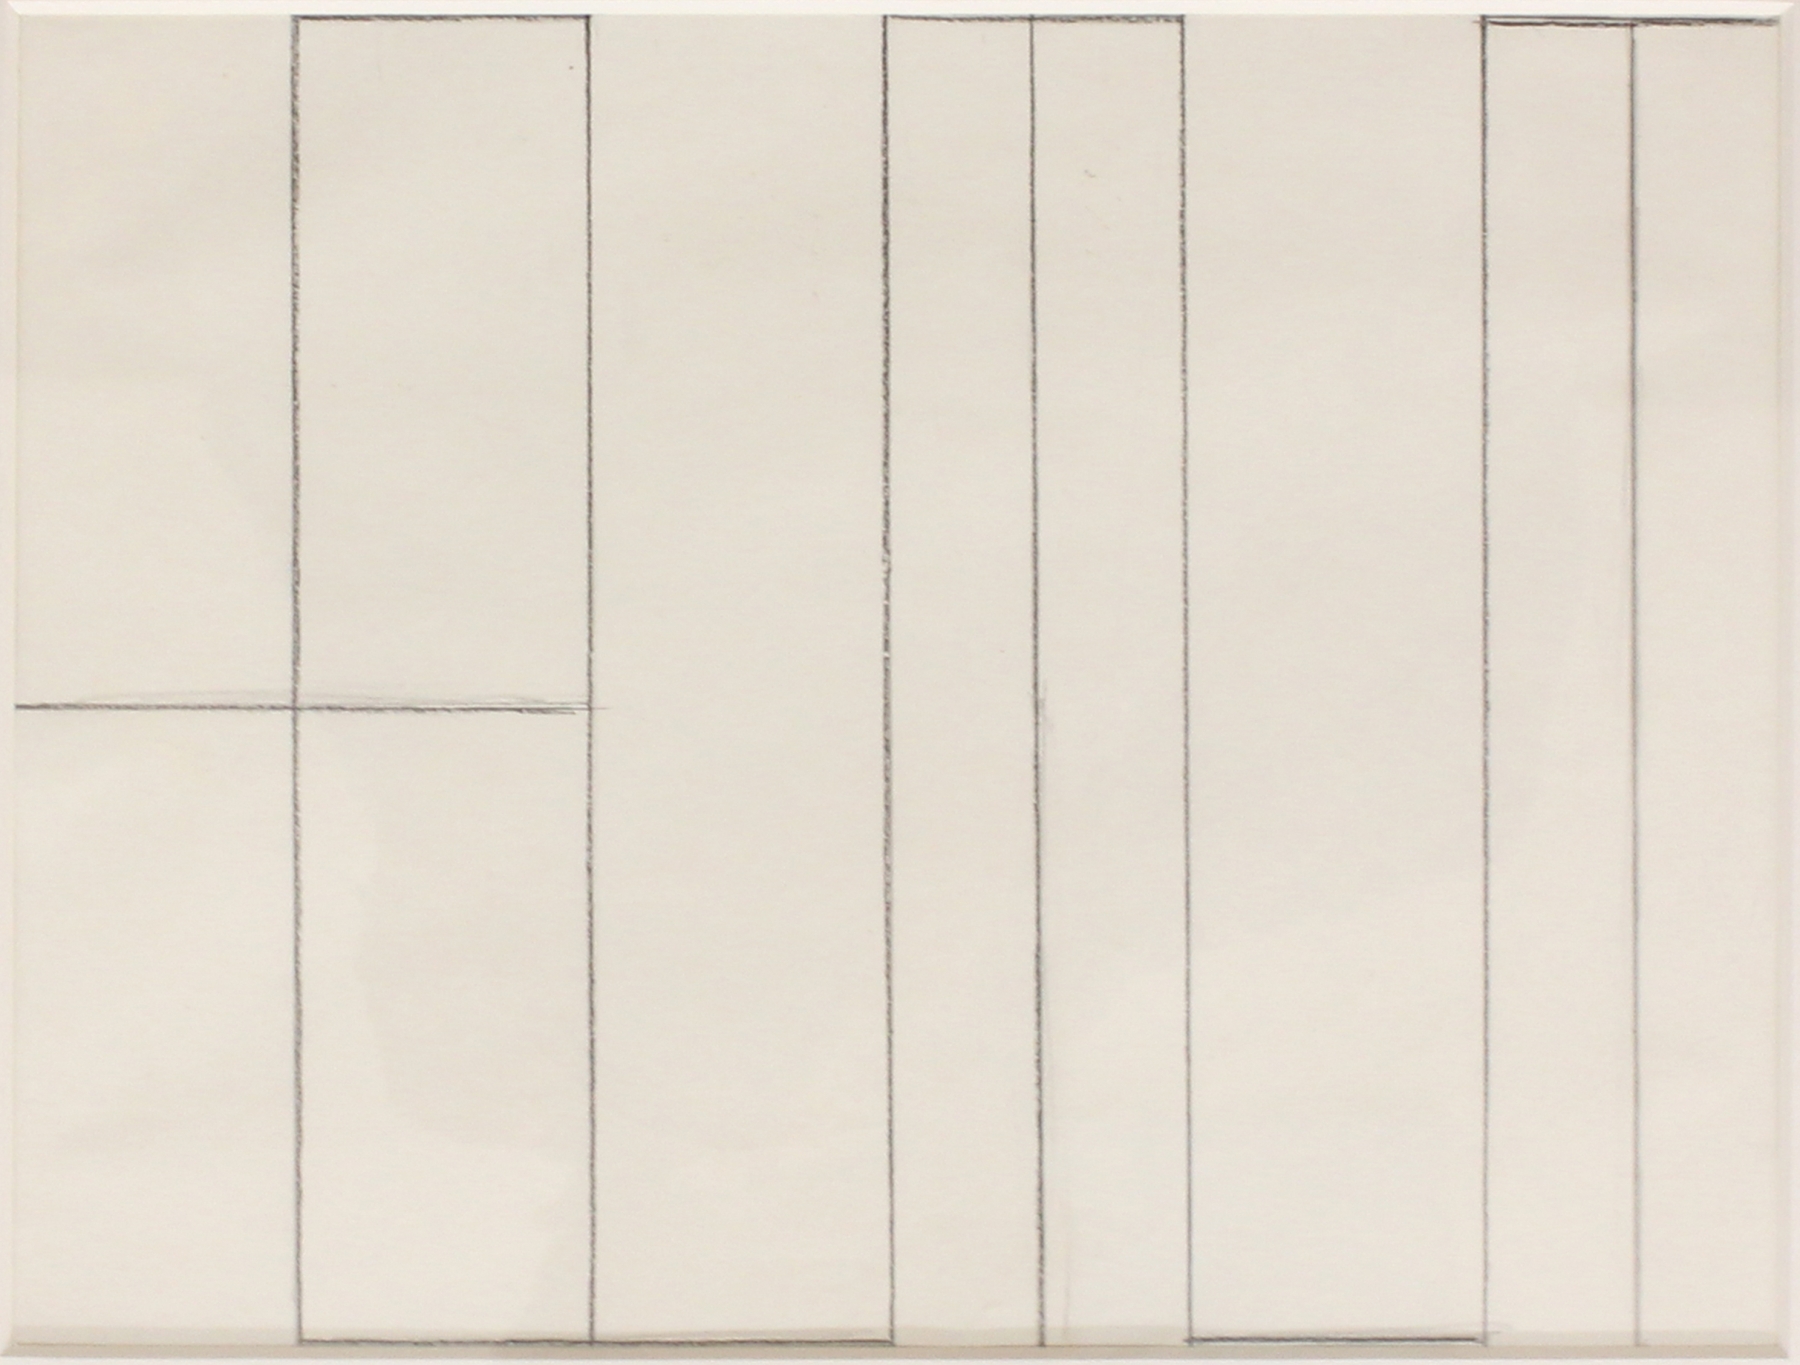 Helmut Federle
My Name as a Structural Design, 1979
Pencil on paper
8 1/2 x 11 inches (21.7 x 28.0 cm)

Inquire
&amp;nbsp;